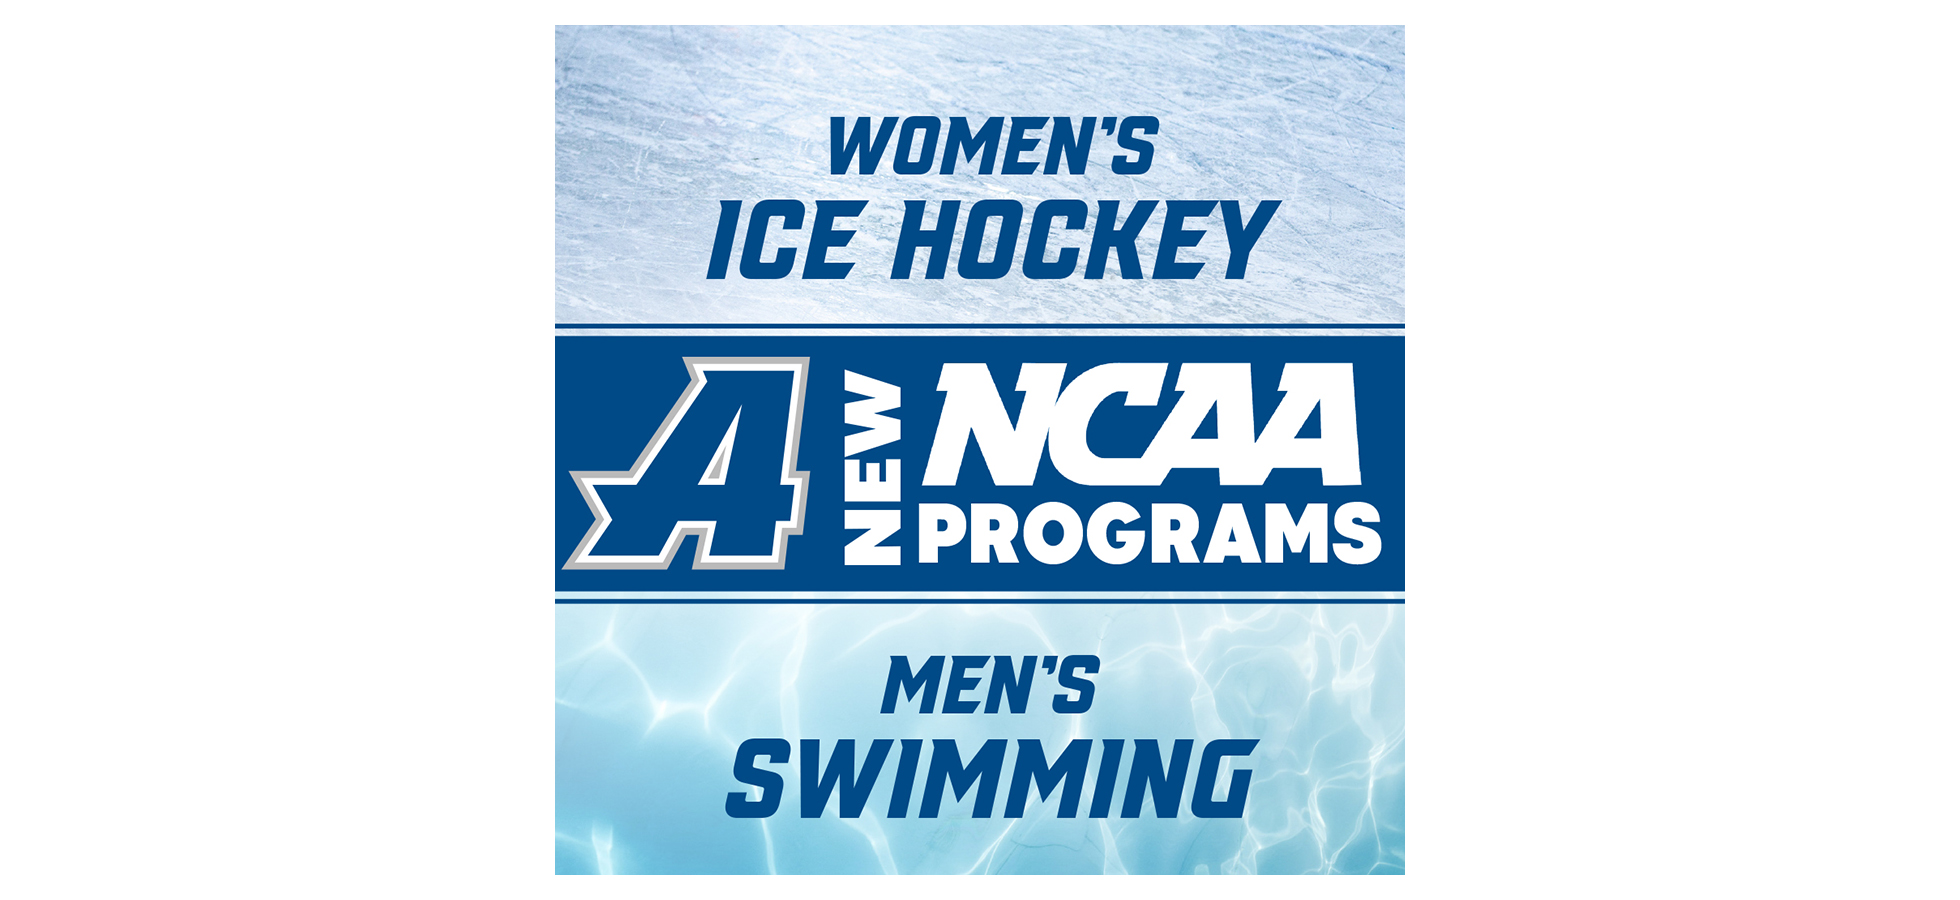 Graphic announcing new Varsity Sports for Women’s Ice Hockey and Men’s Swimming at Assumption University.